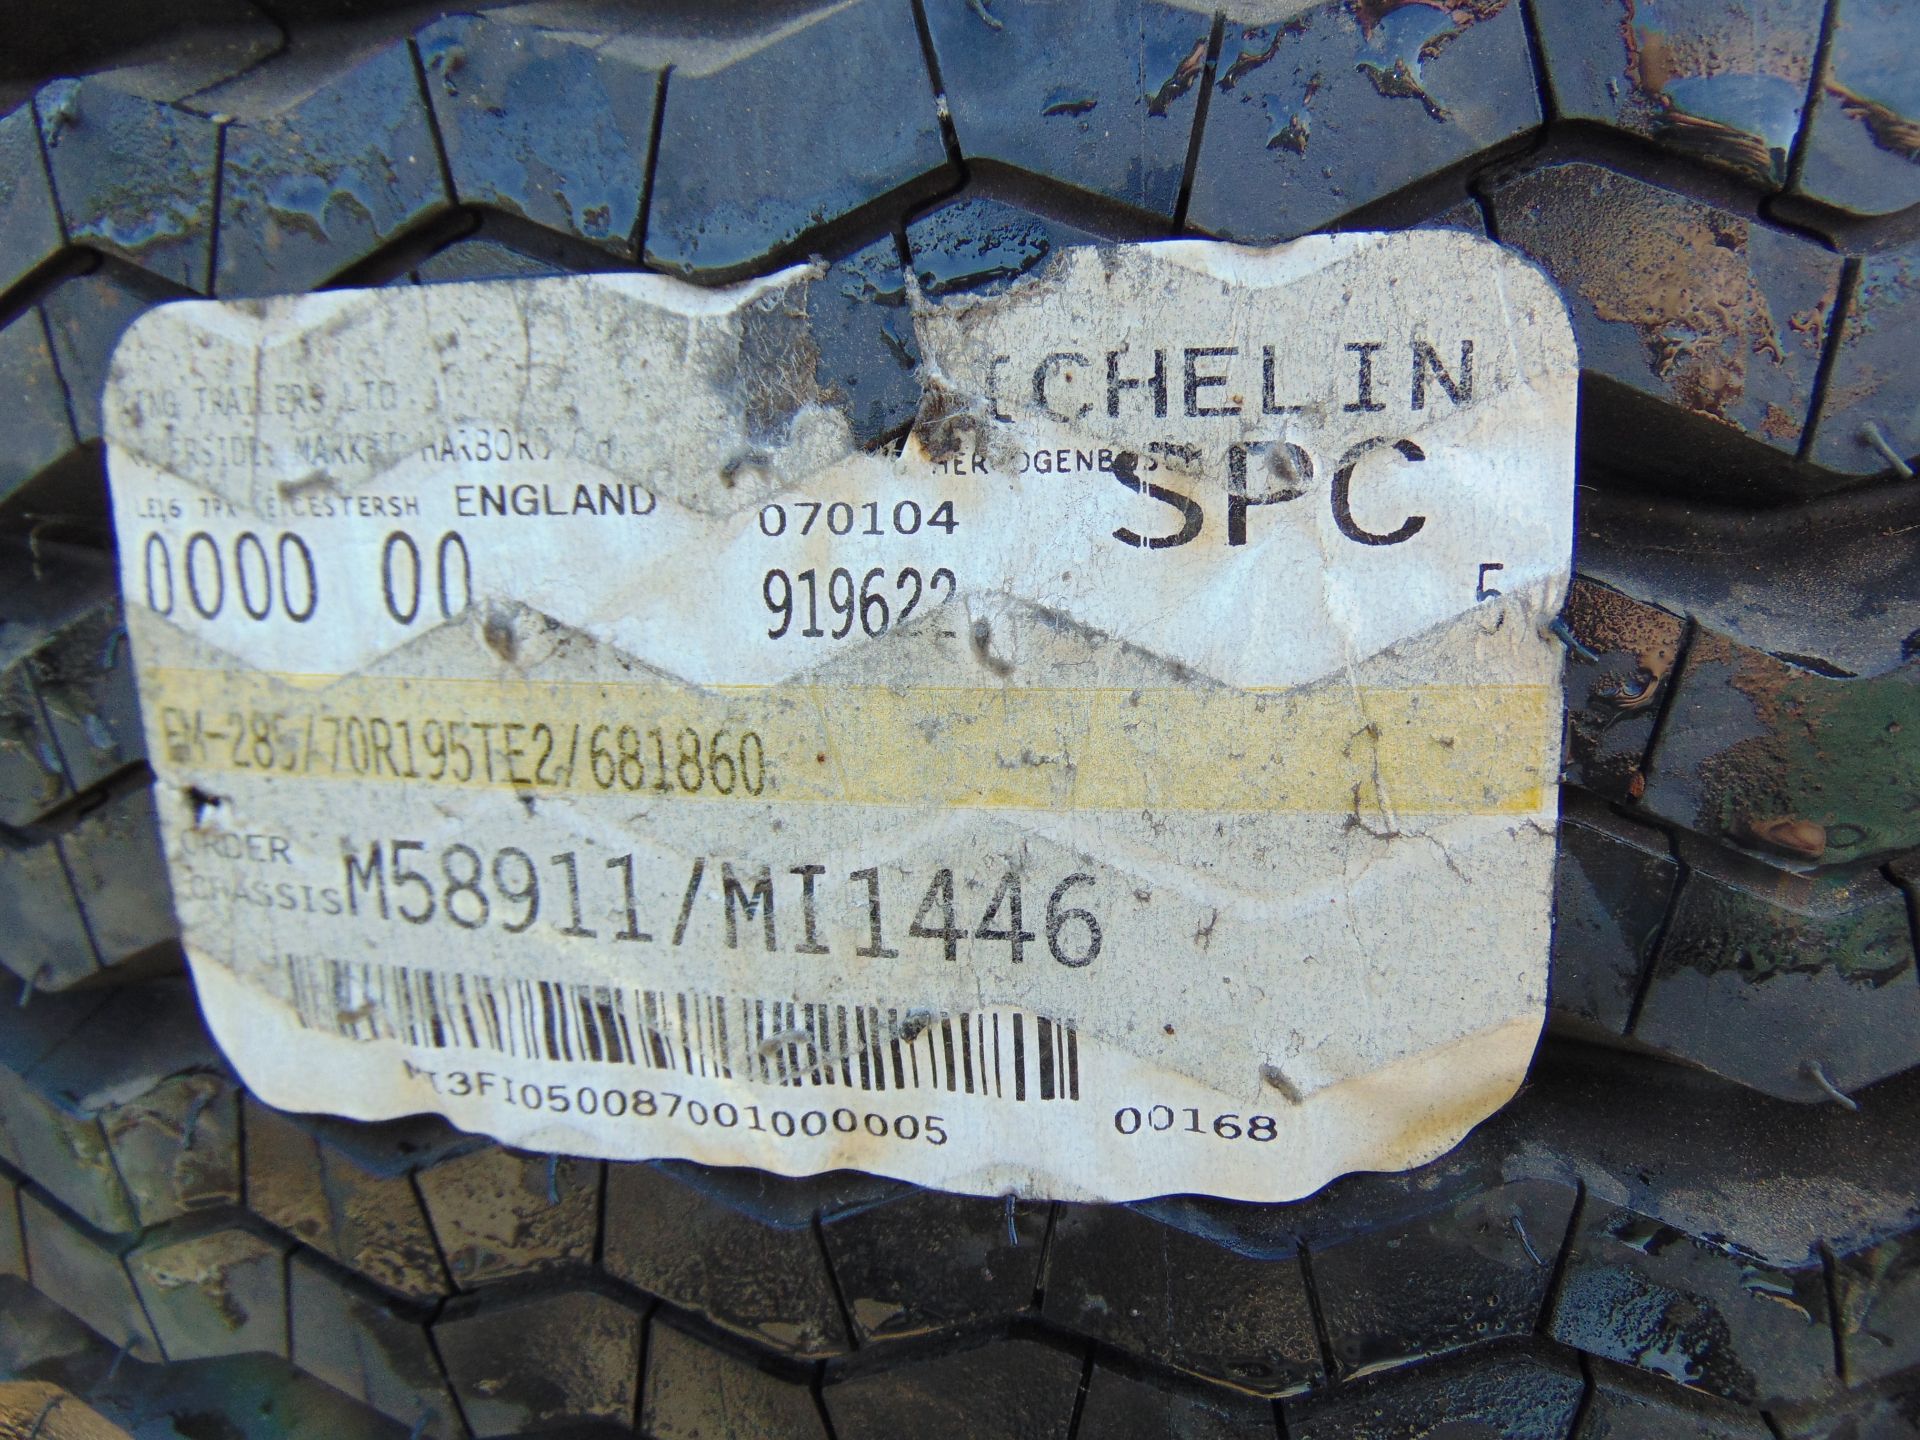 5 x Michelin XTE 2 285/70 R19.5 Tyres with 8 Stud Rims - Image 3 of 8